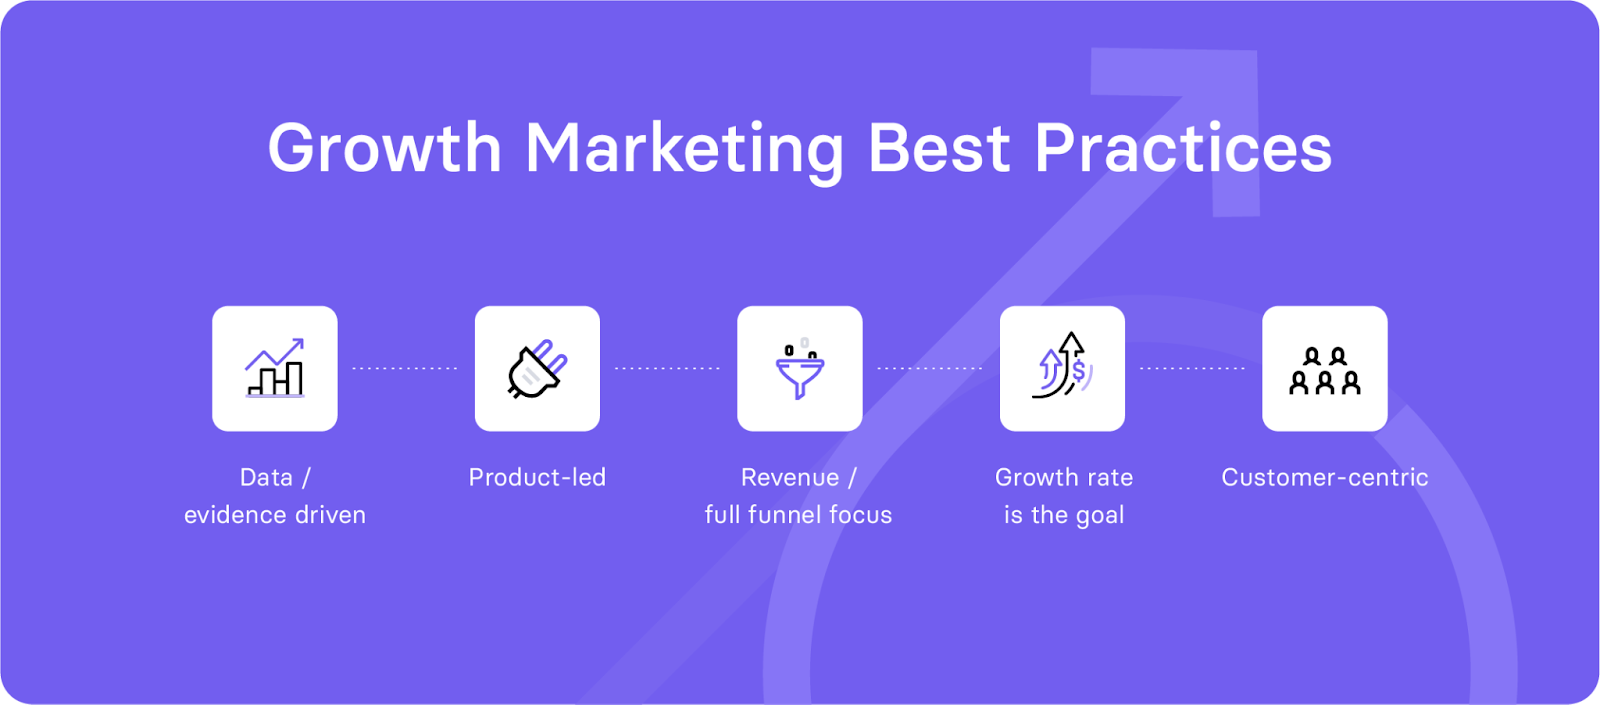 Purple background with growth marketing best practices: data/evidence driven, product-led, revenue/full funnel focus, growth rate is not the goal, customer-centric